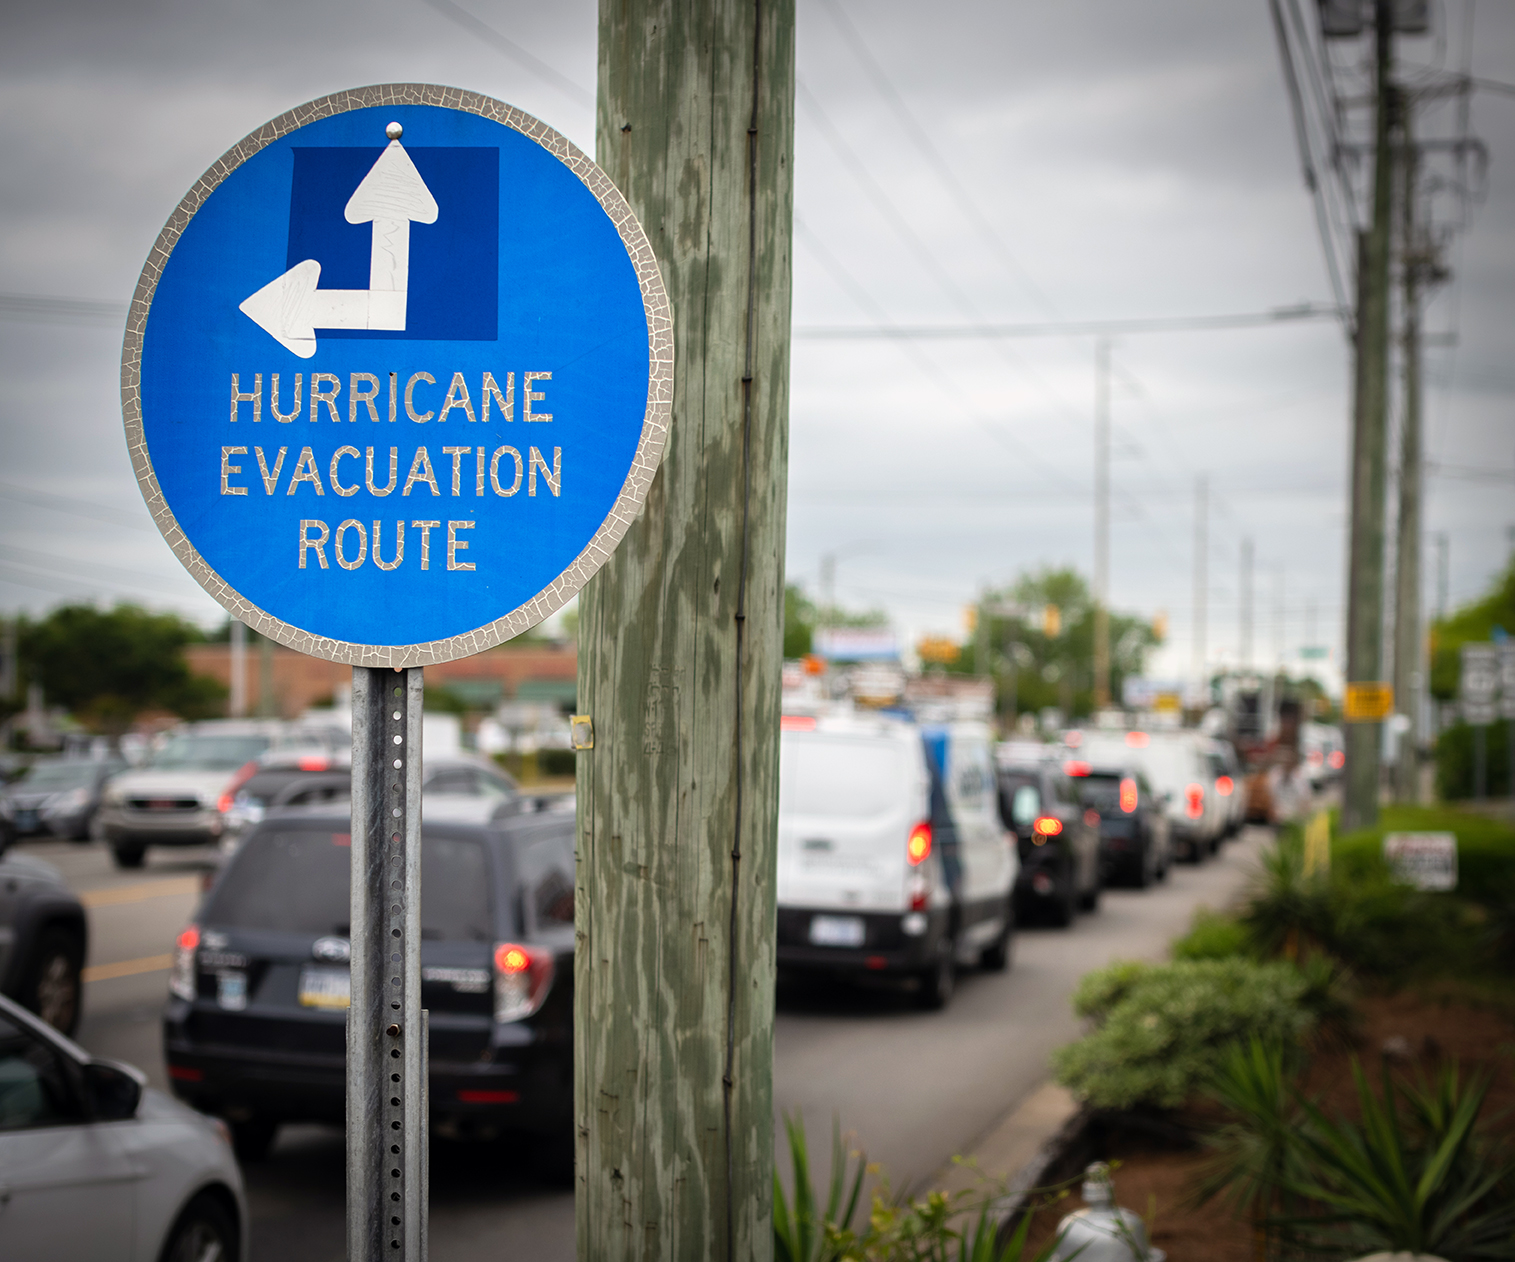 Hurricane Evacuation Route sign with Traffic